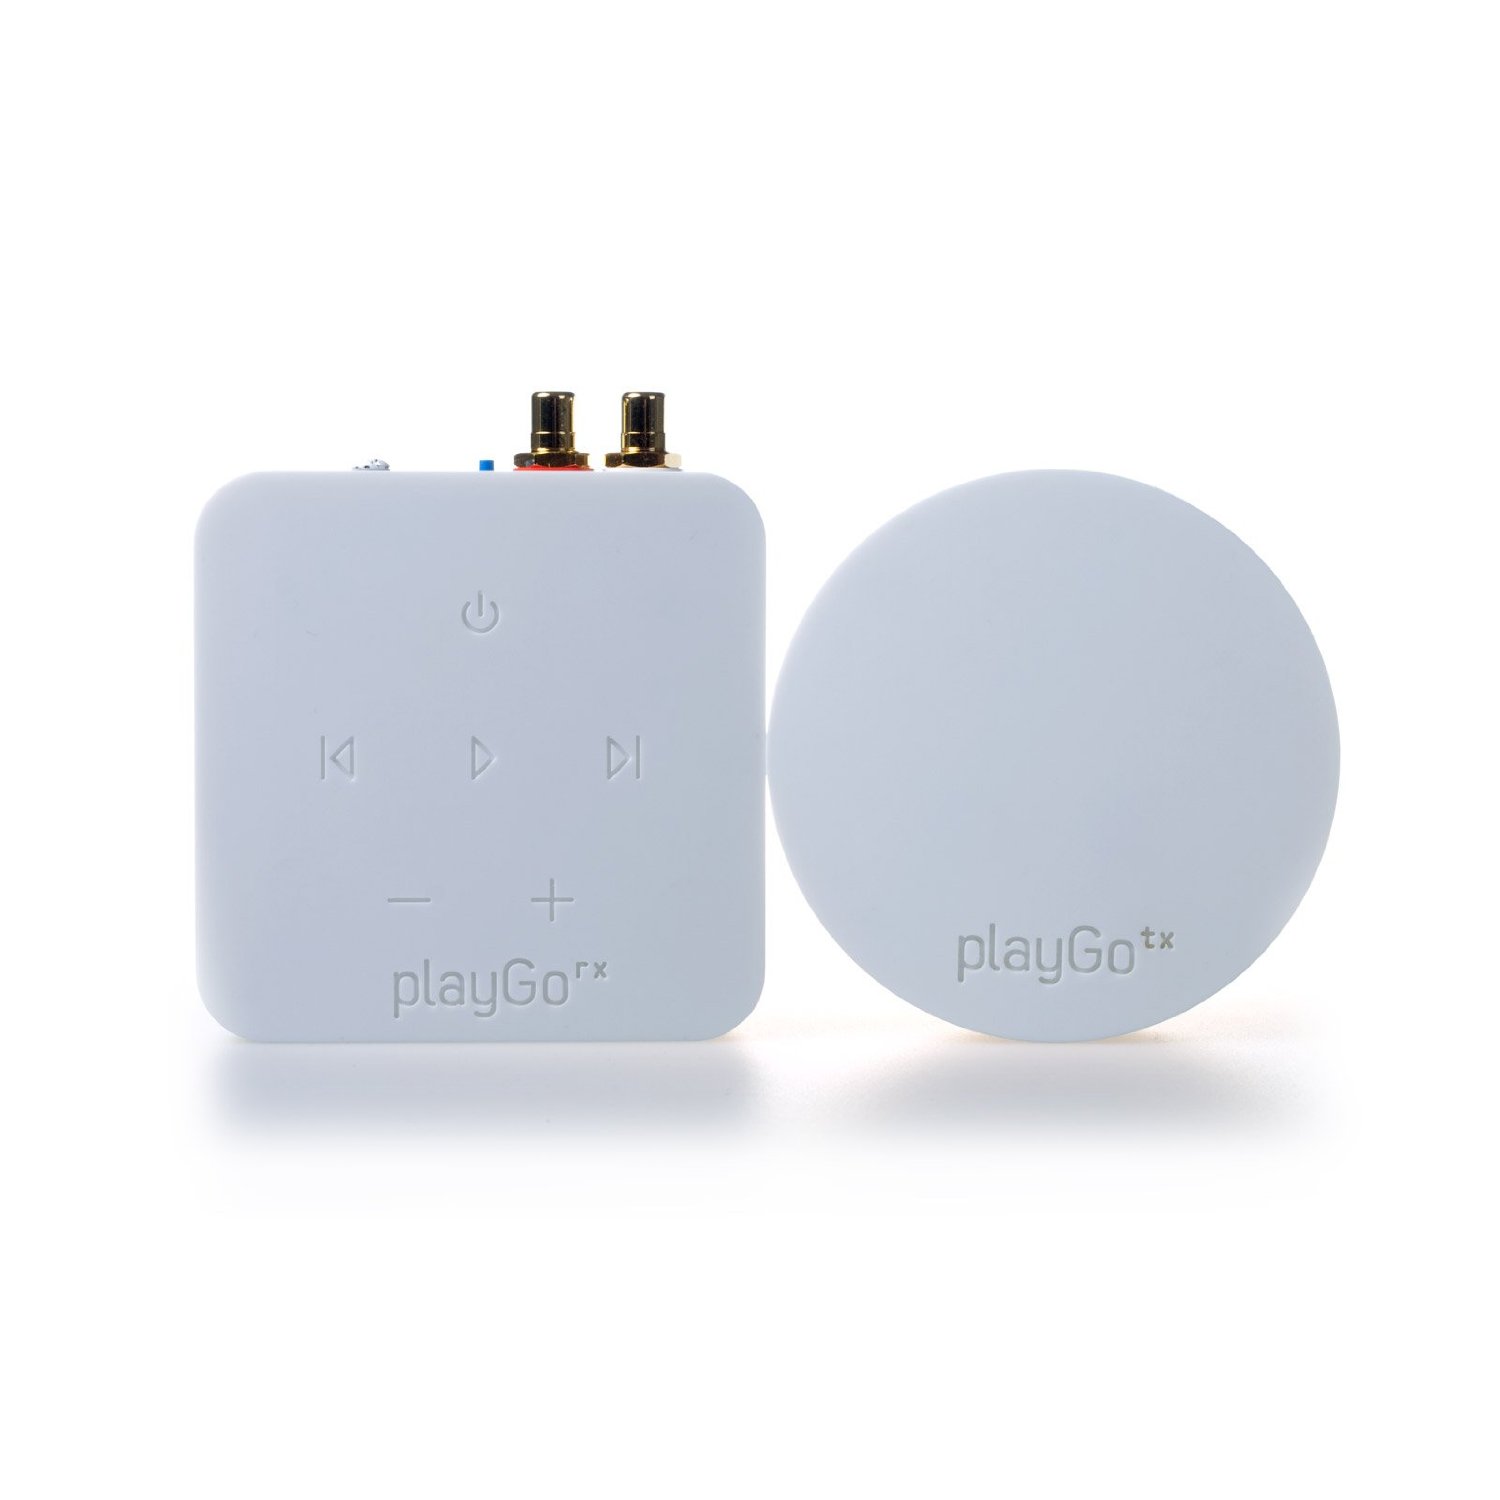 http://thetechjournal.com/wp-content/uploads/images/1108/1314328065-playgo-usb-wirelessly-connects-computer-and-stereo-1.jpg